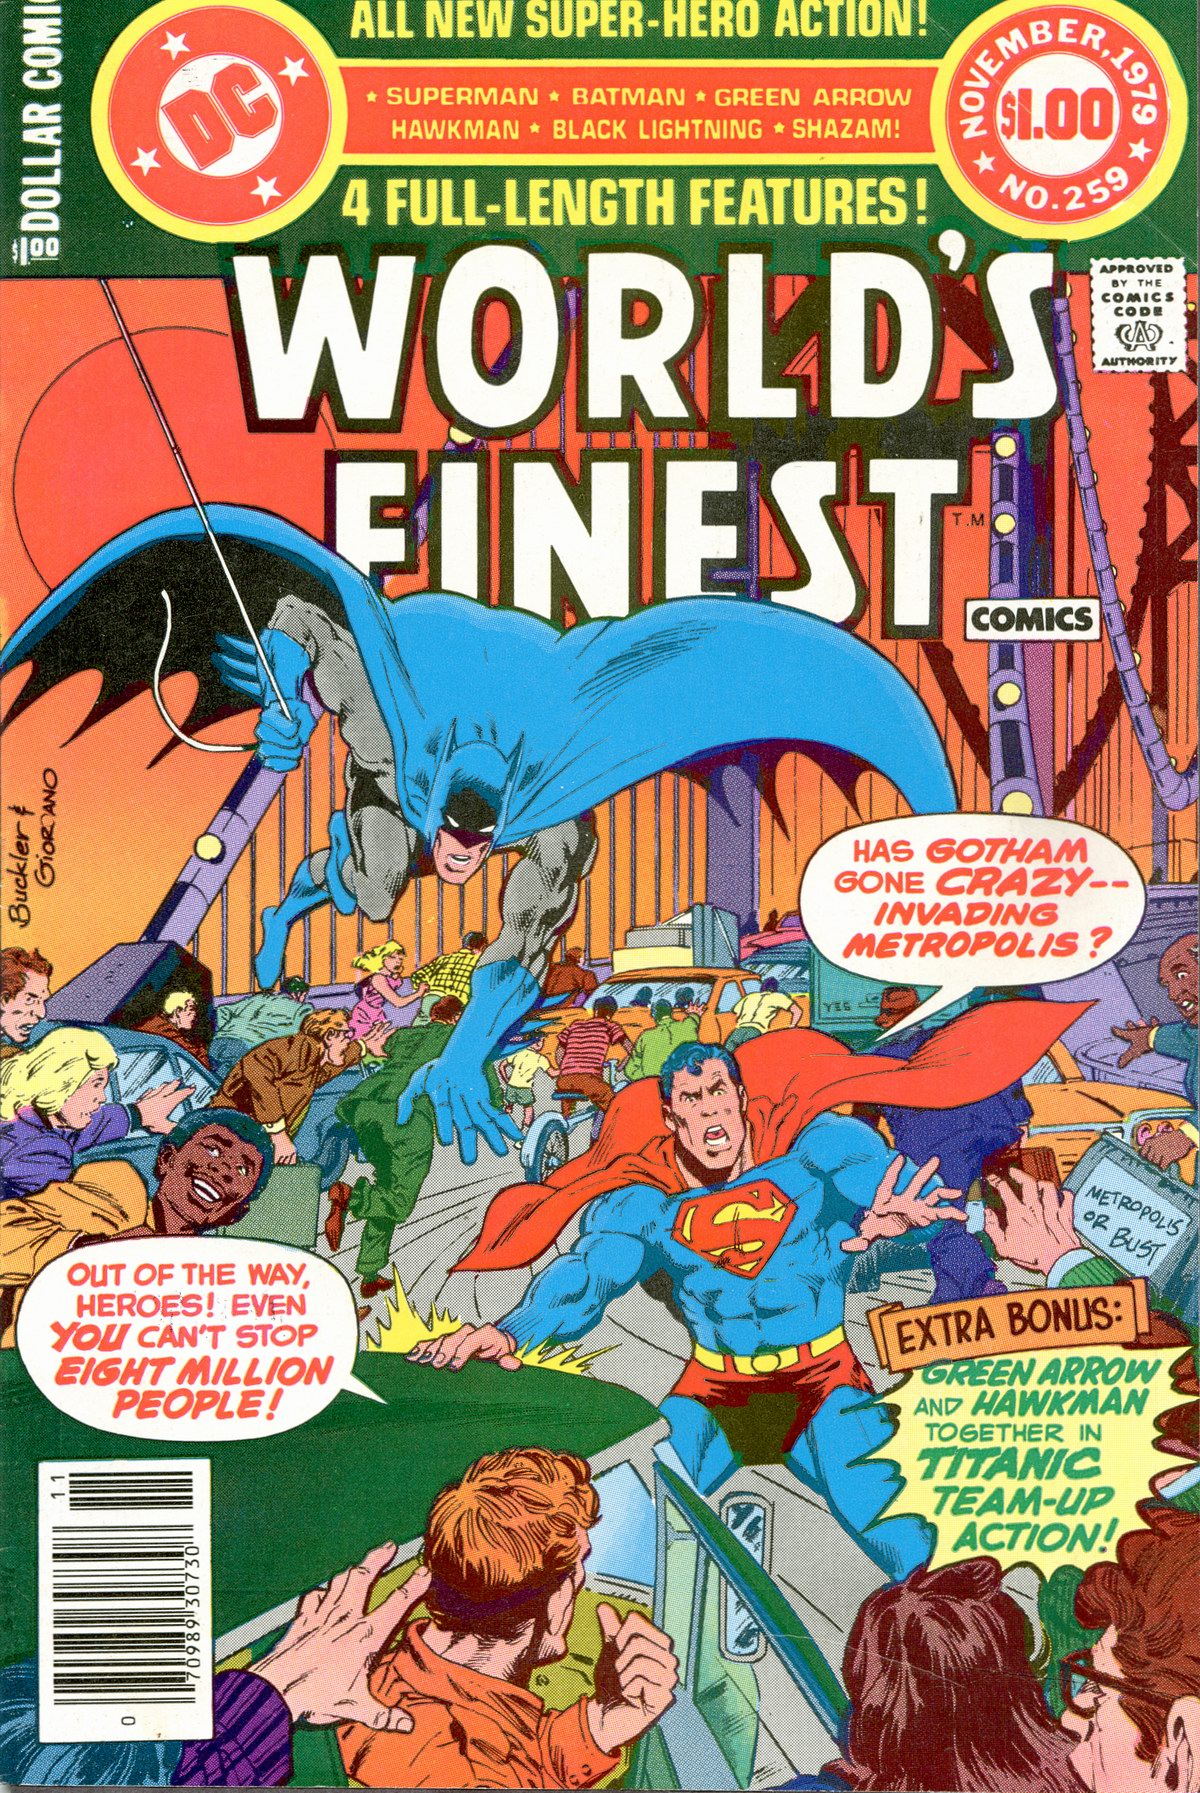 World's Finest Comics issue 259 - Page 1